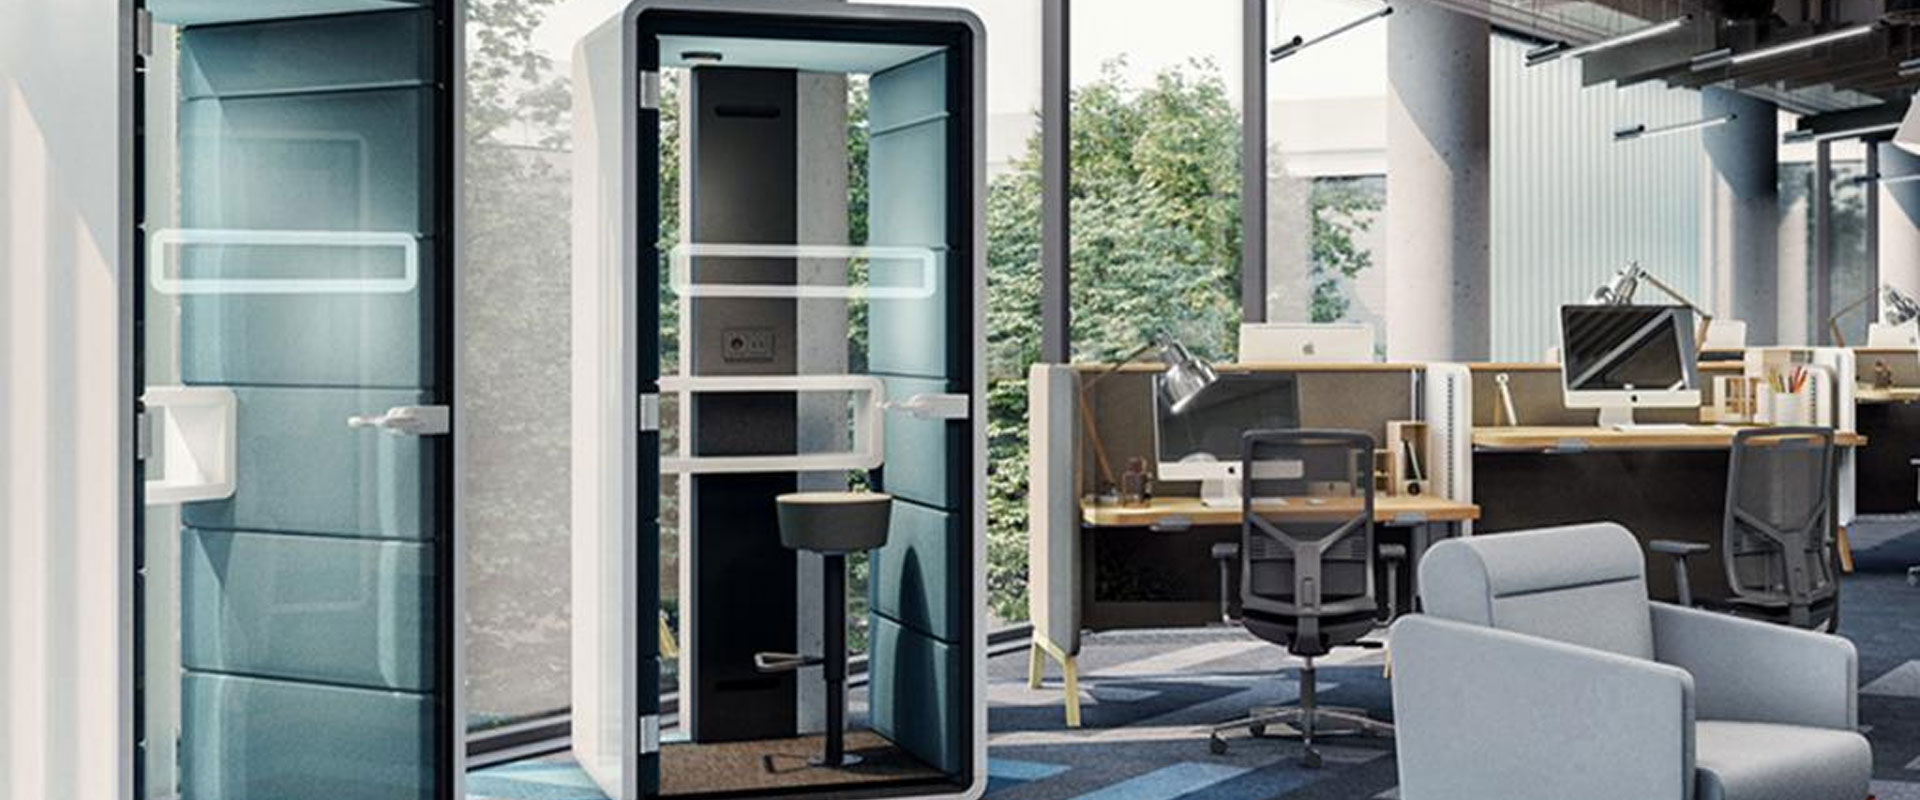 Customizing a work pod with color and design options